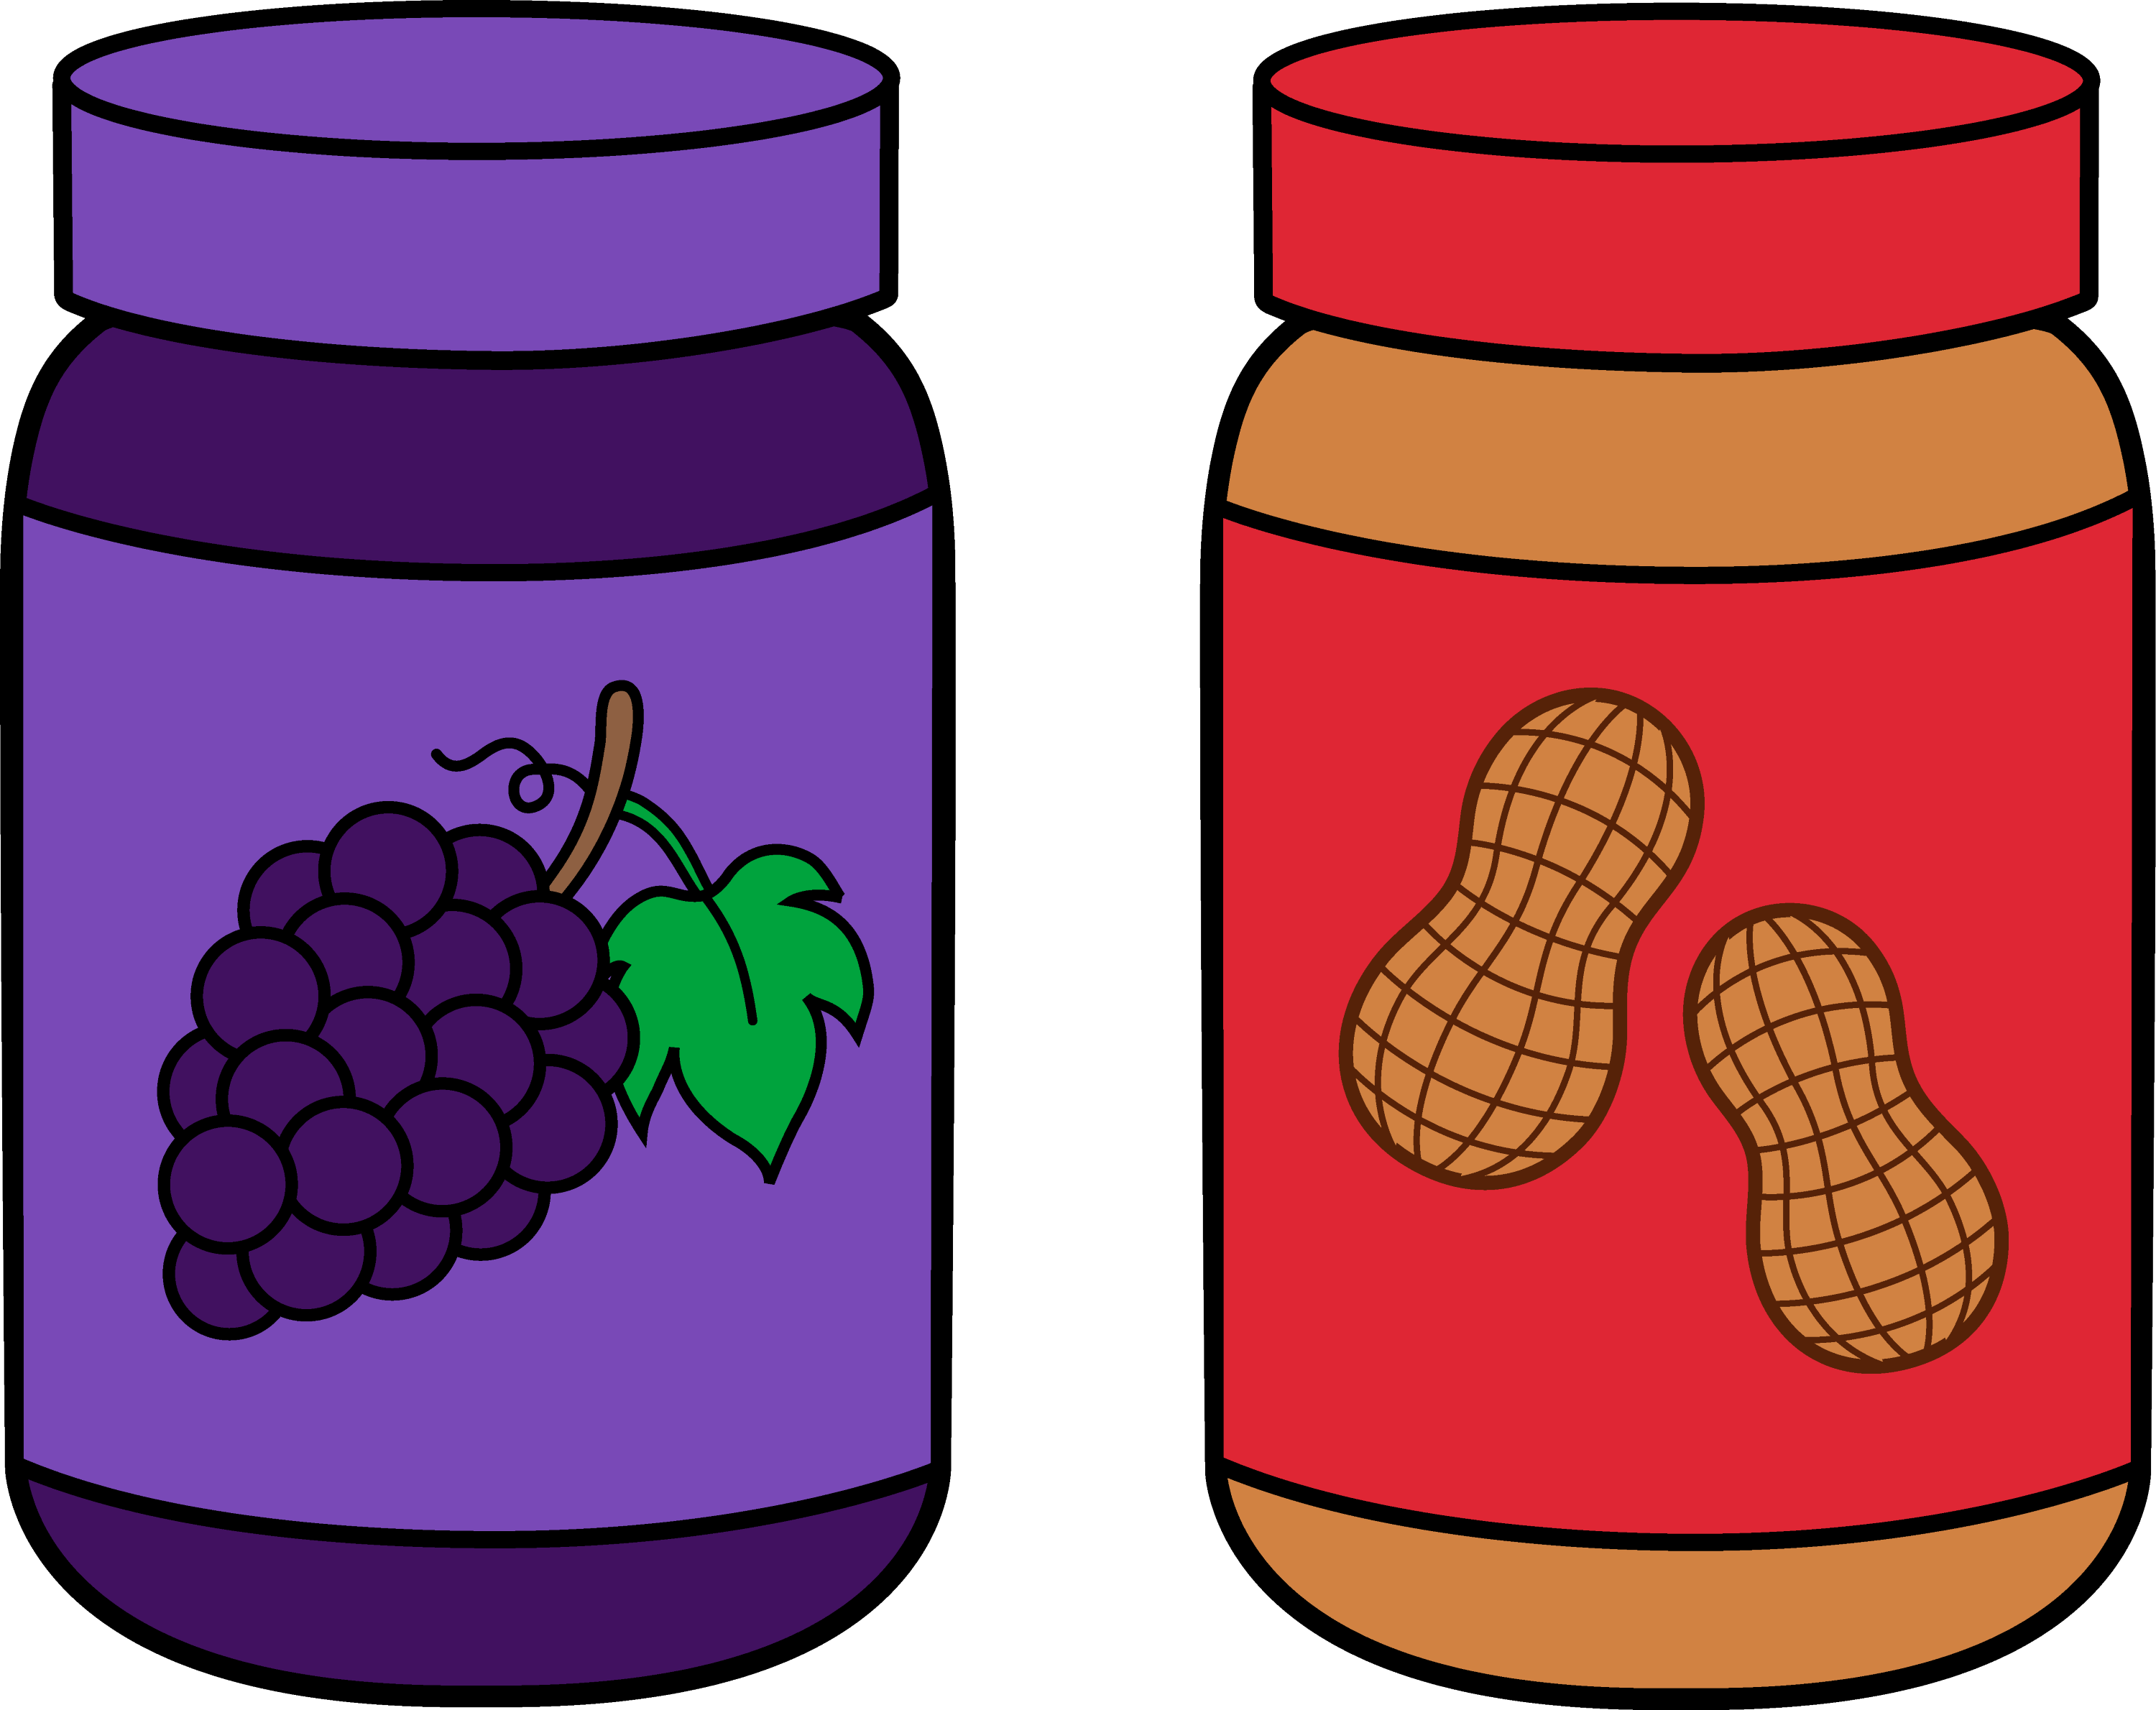 clipart of jelly - photo #42